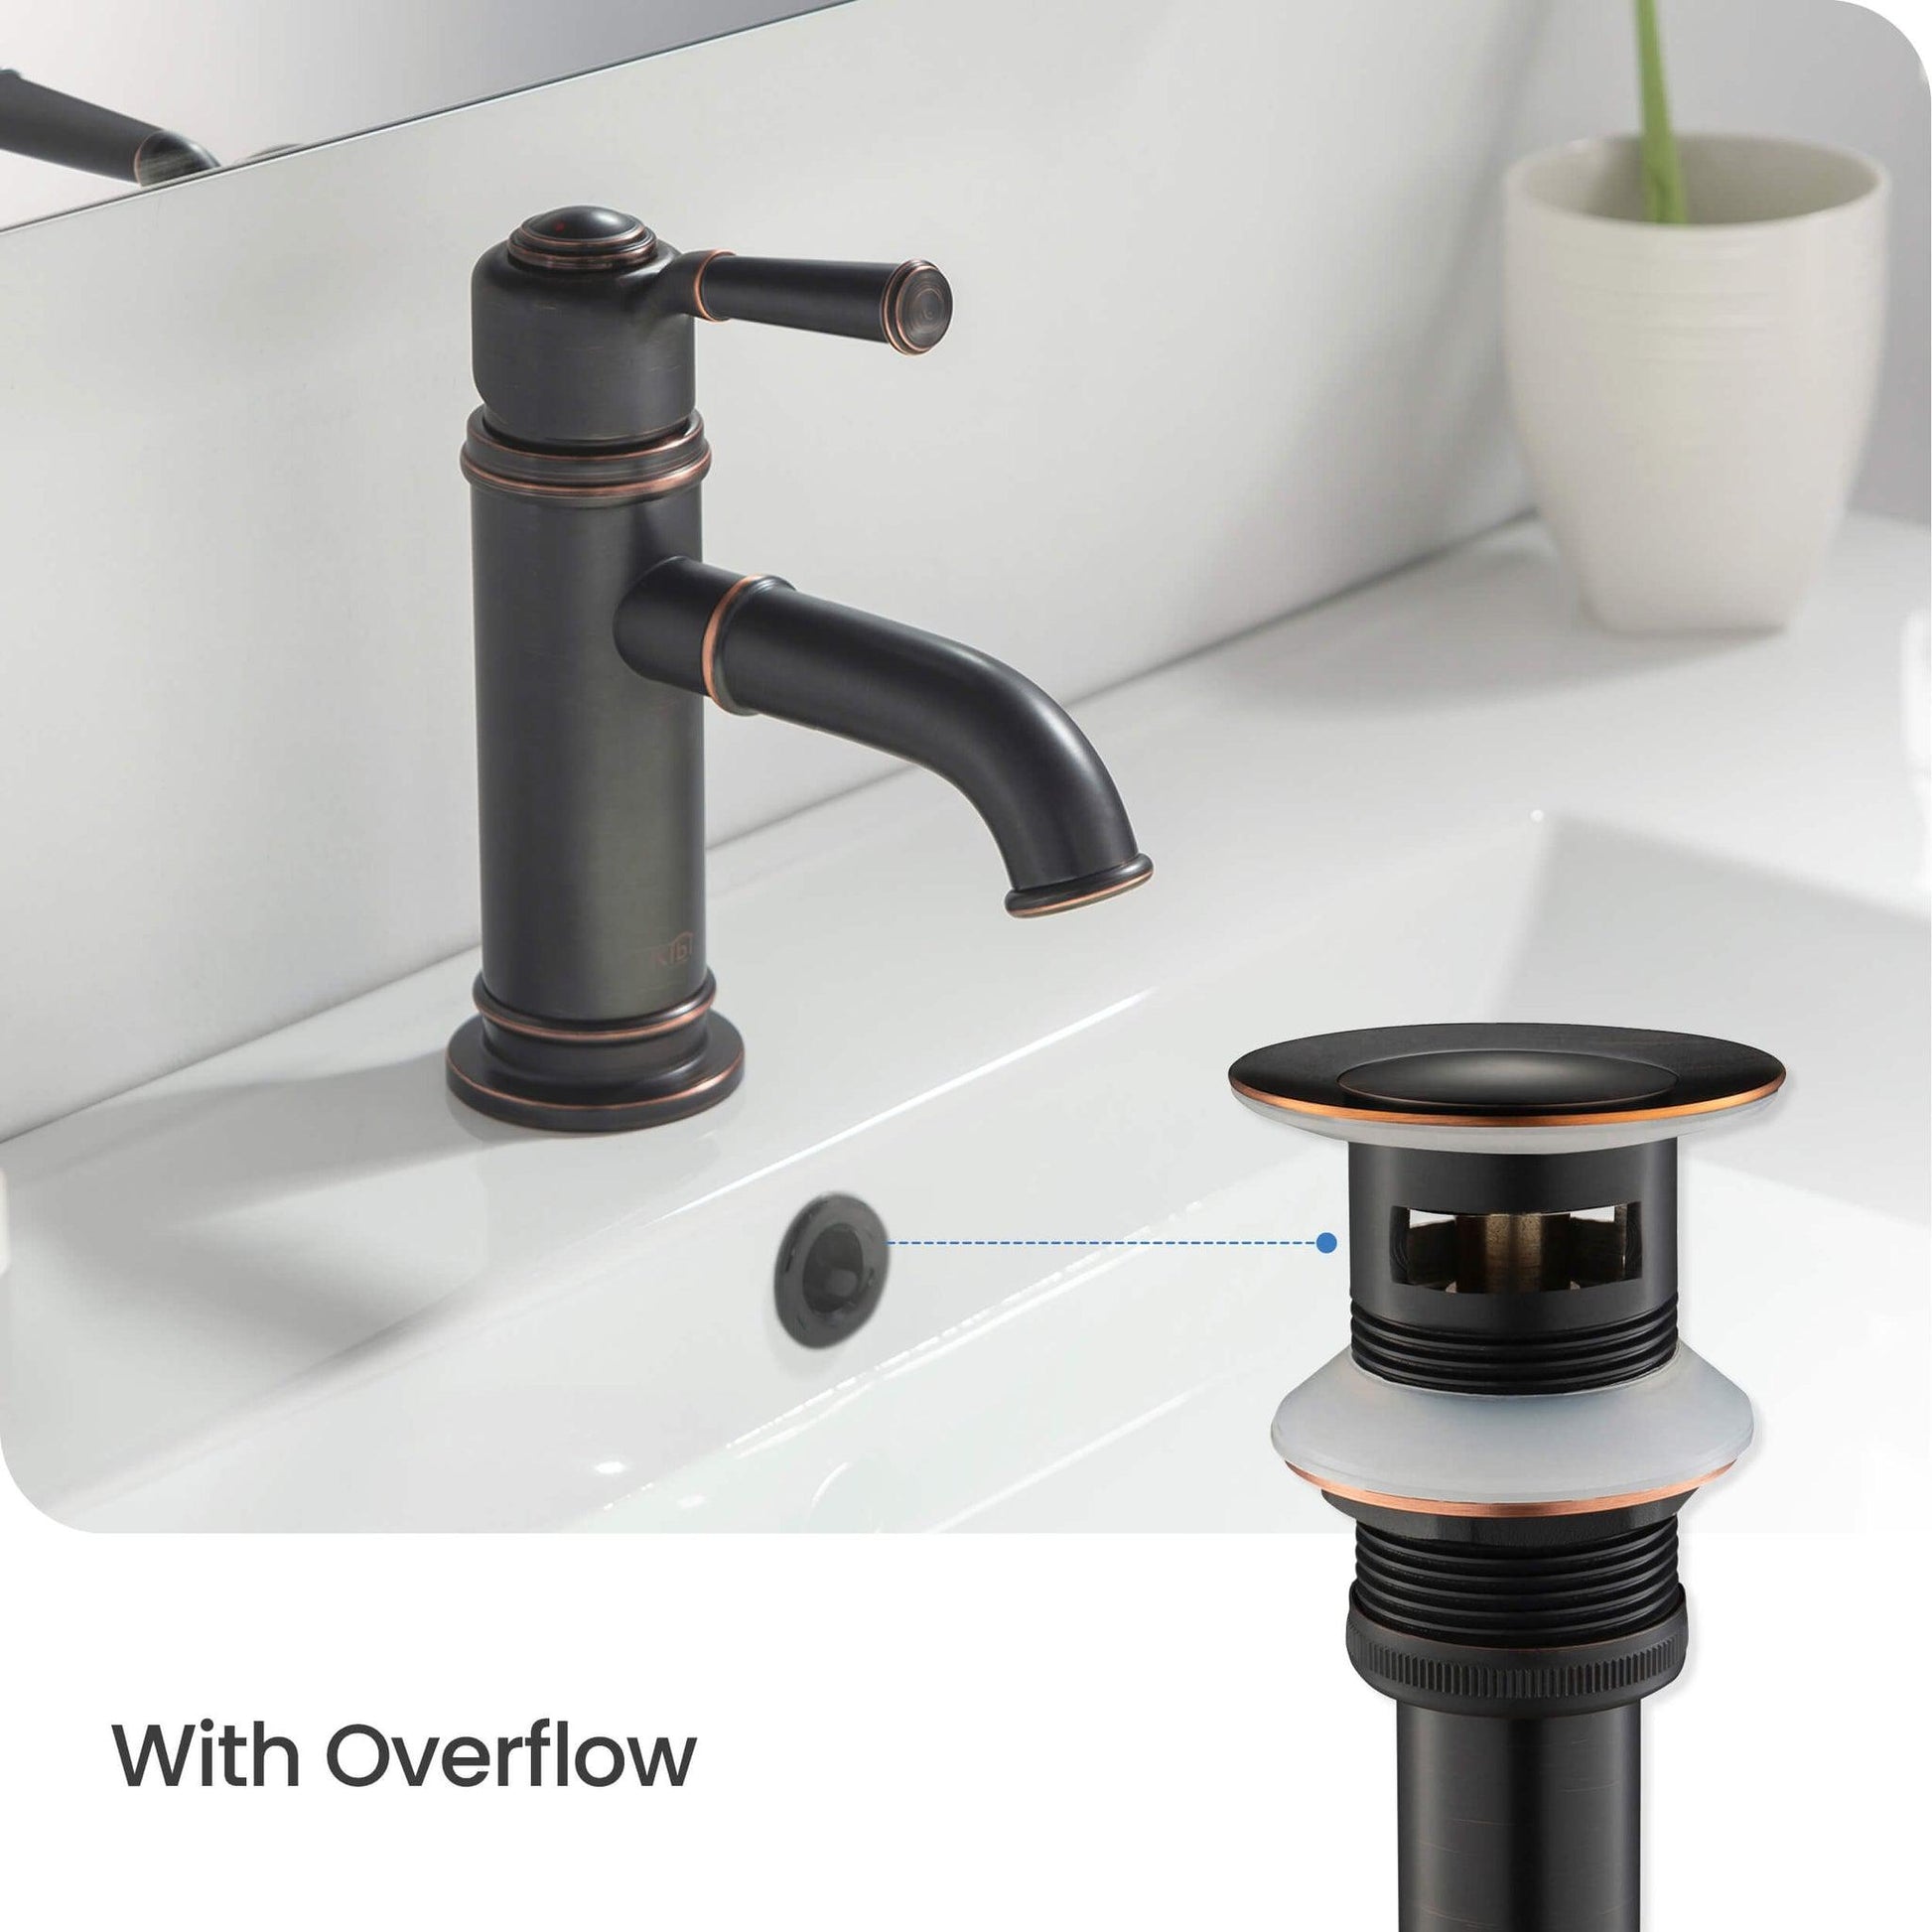 KIBI Brass Bathroom Sink Pop-Up Drain Stopper Small Cover With Overflow in Oil Rubbed Bronze Finish